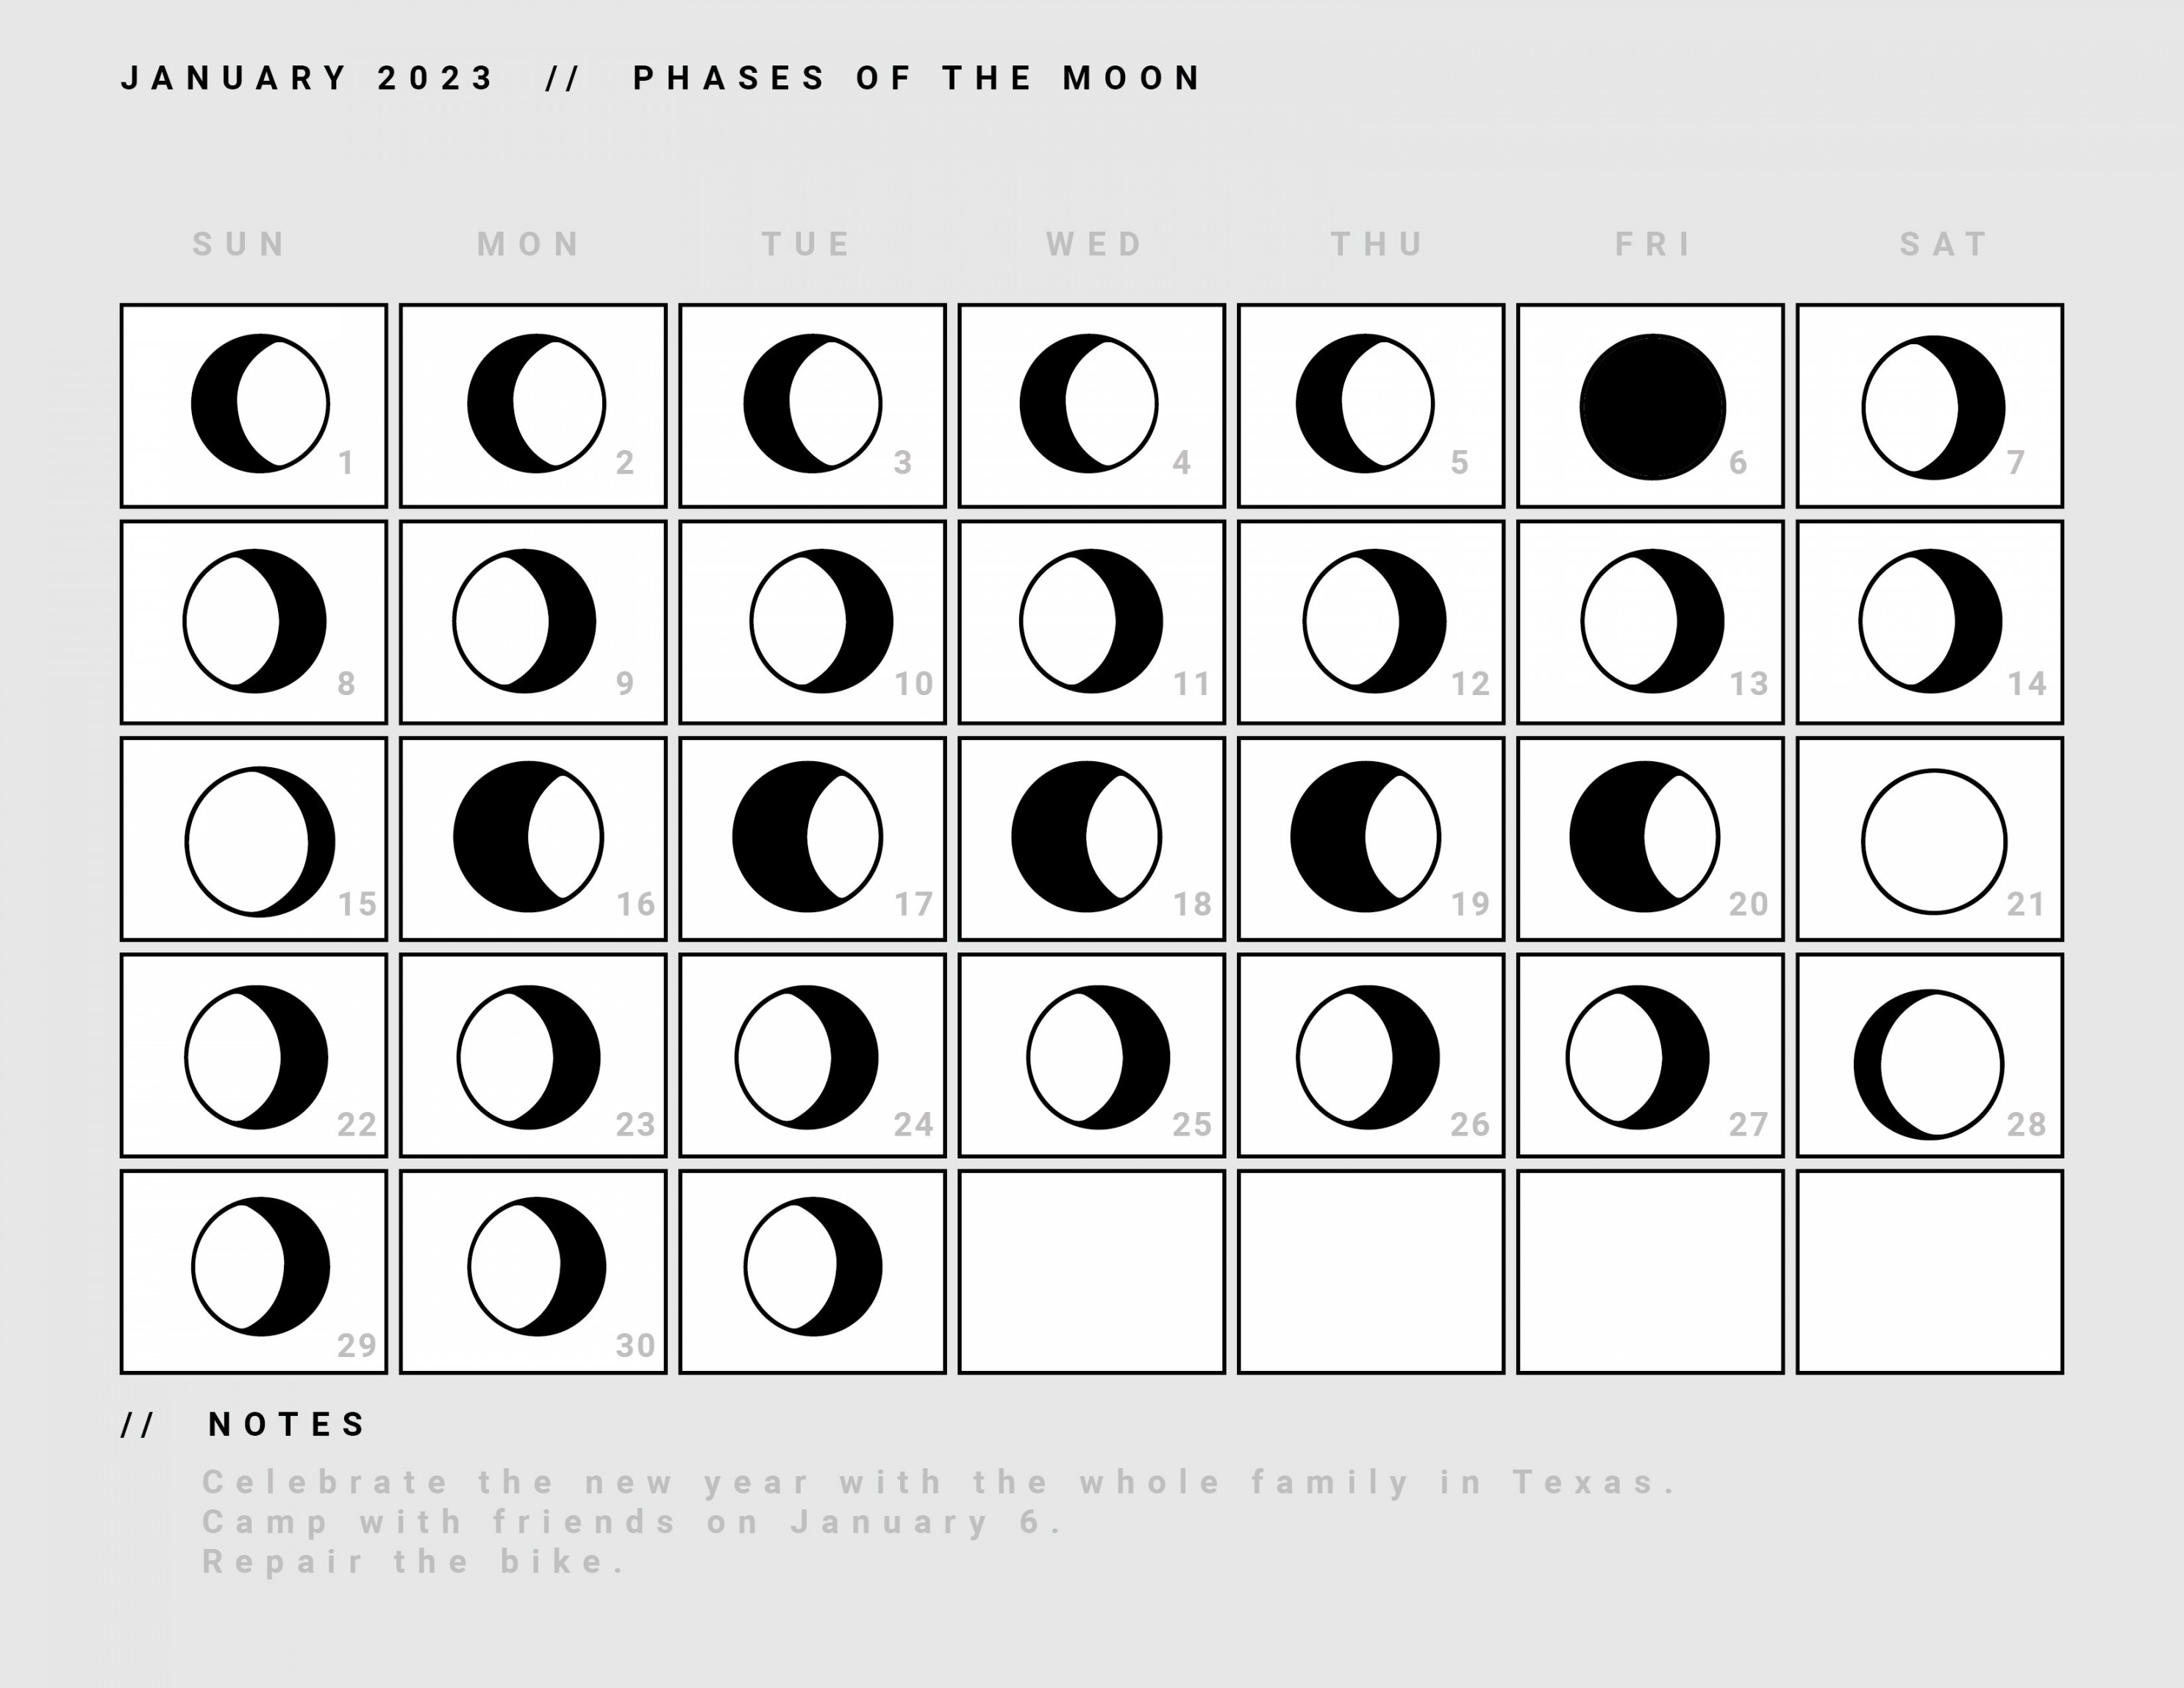 Free January  Calendar Template With Moon Phases - Download in